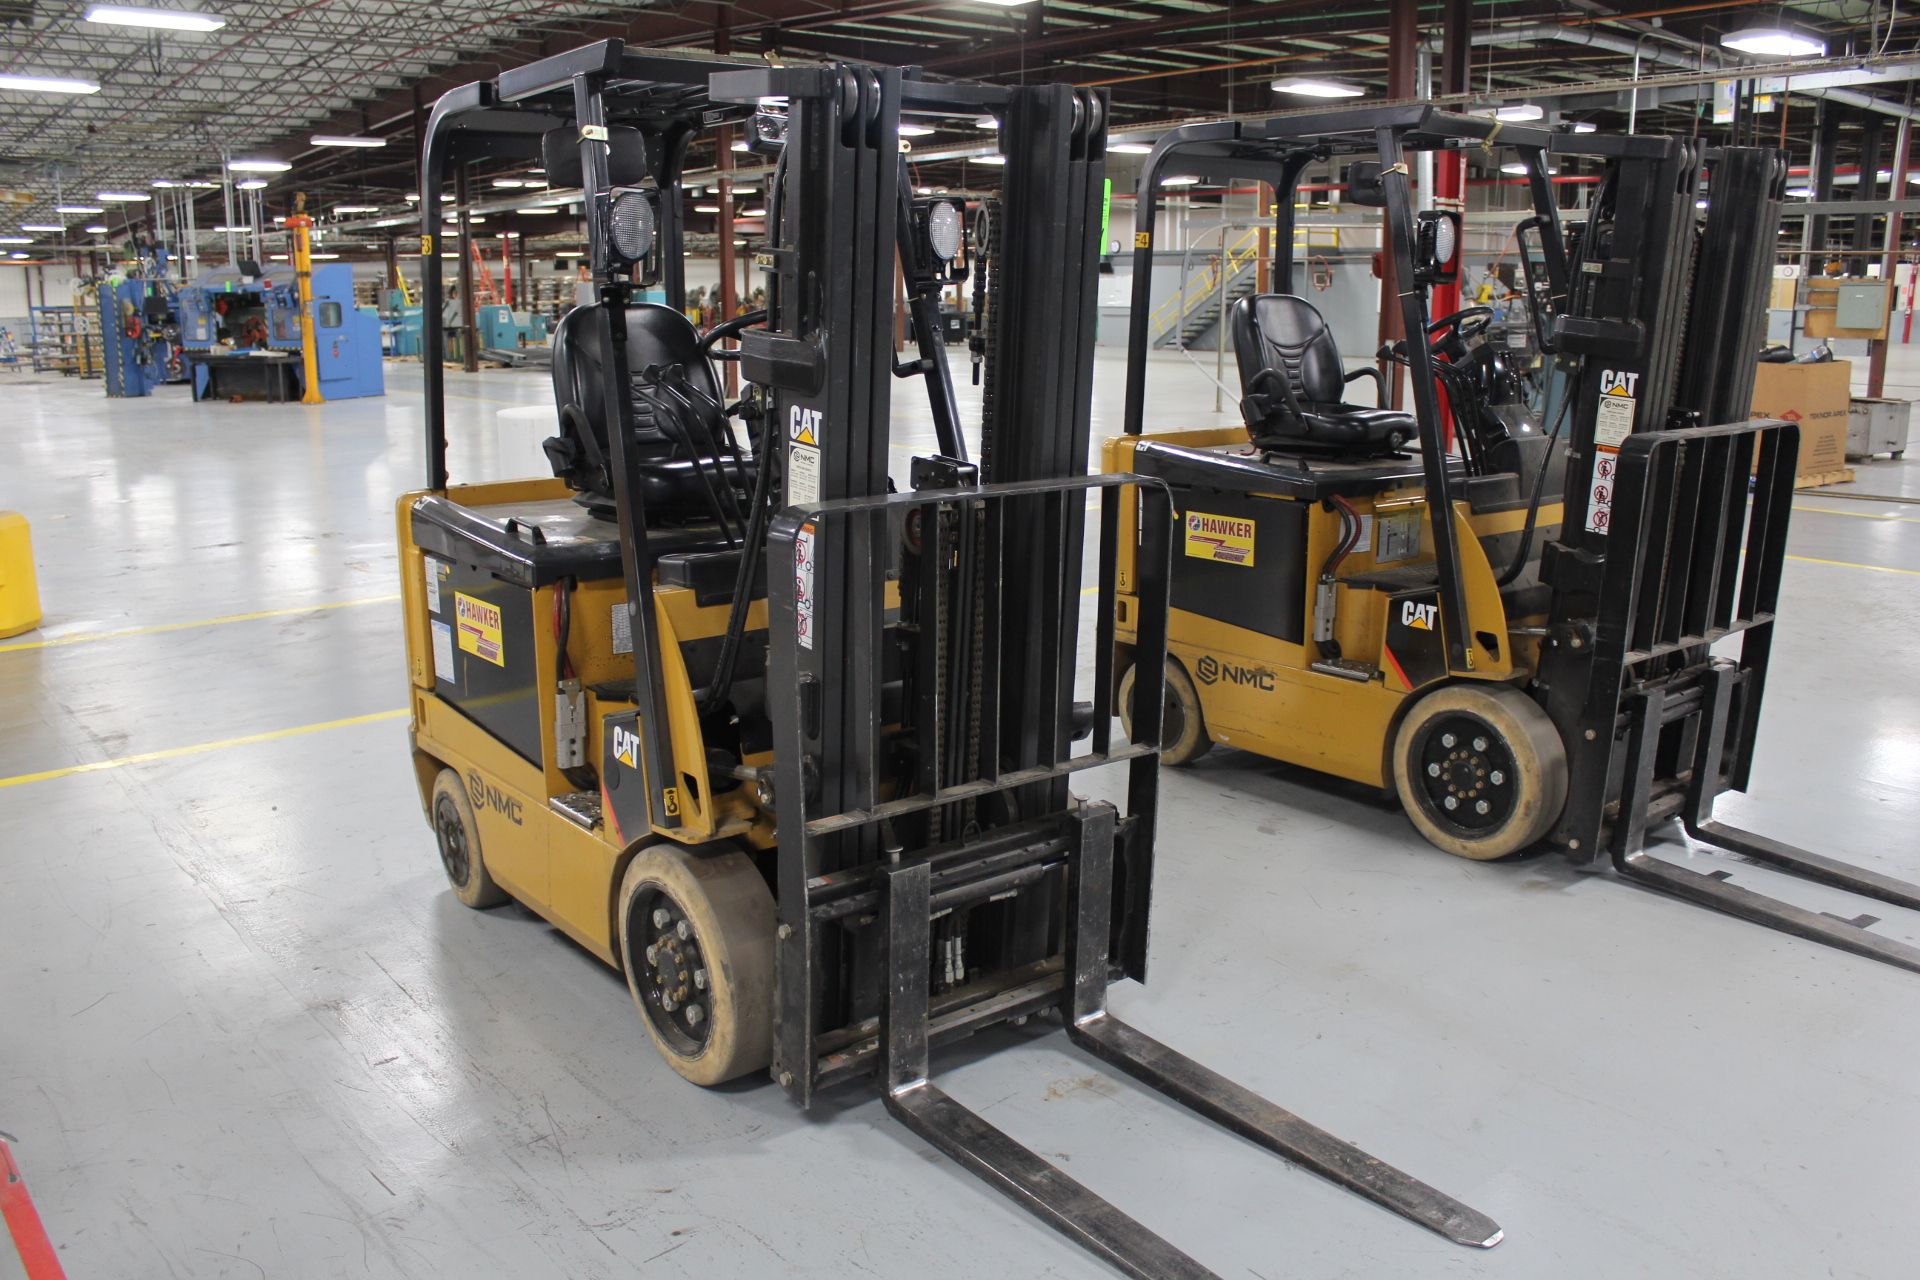 Caterpillar Model E5000-AC 4,450 Lb. Capacity Electric Forklift, S/N A4EC241379, Sit-Down Rider, - Image 2 of 4